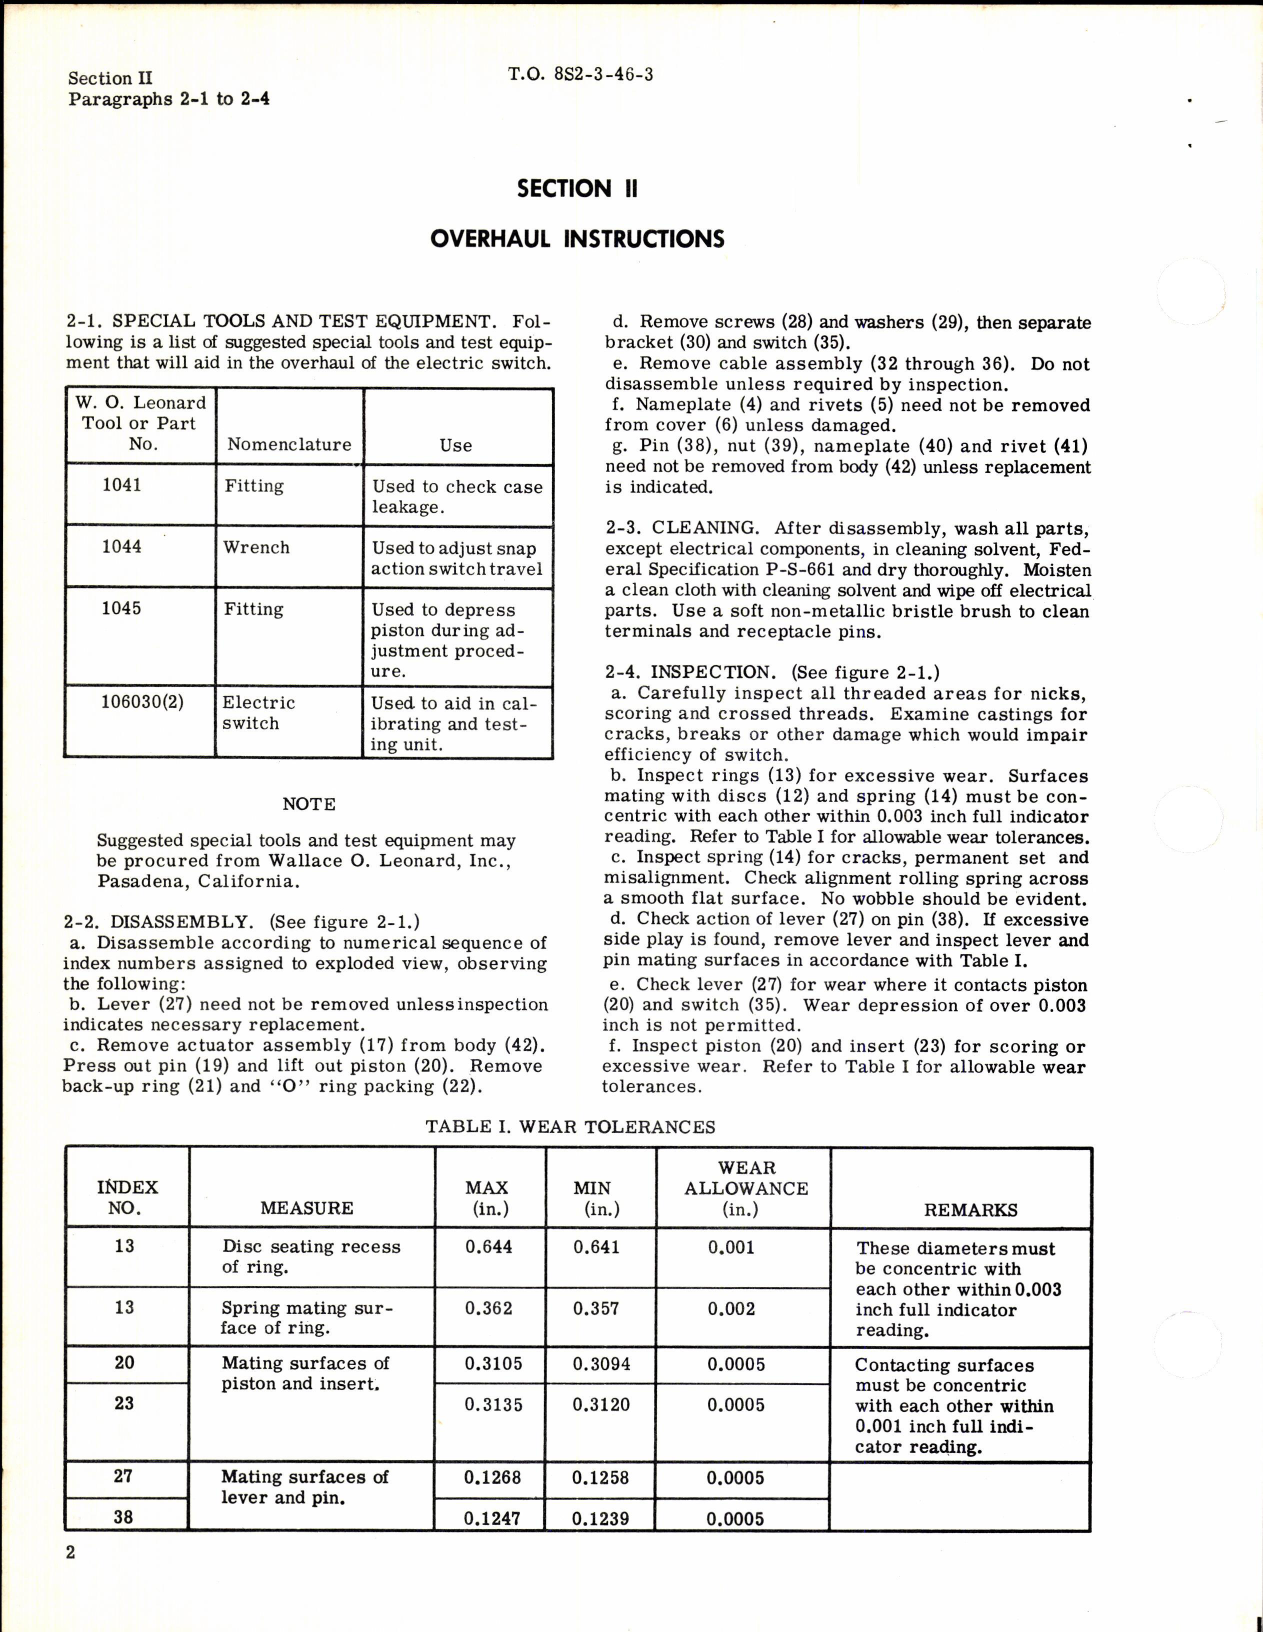 Sample page 4 from AirCorps Library document: Fluid Pressure Switches Part No 106130-2 and 106130-3